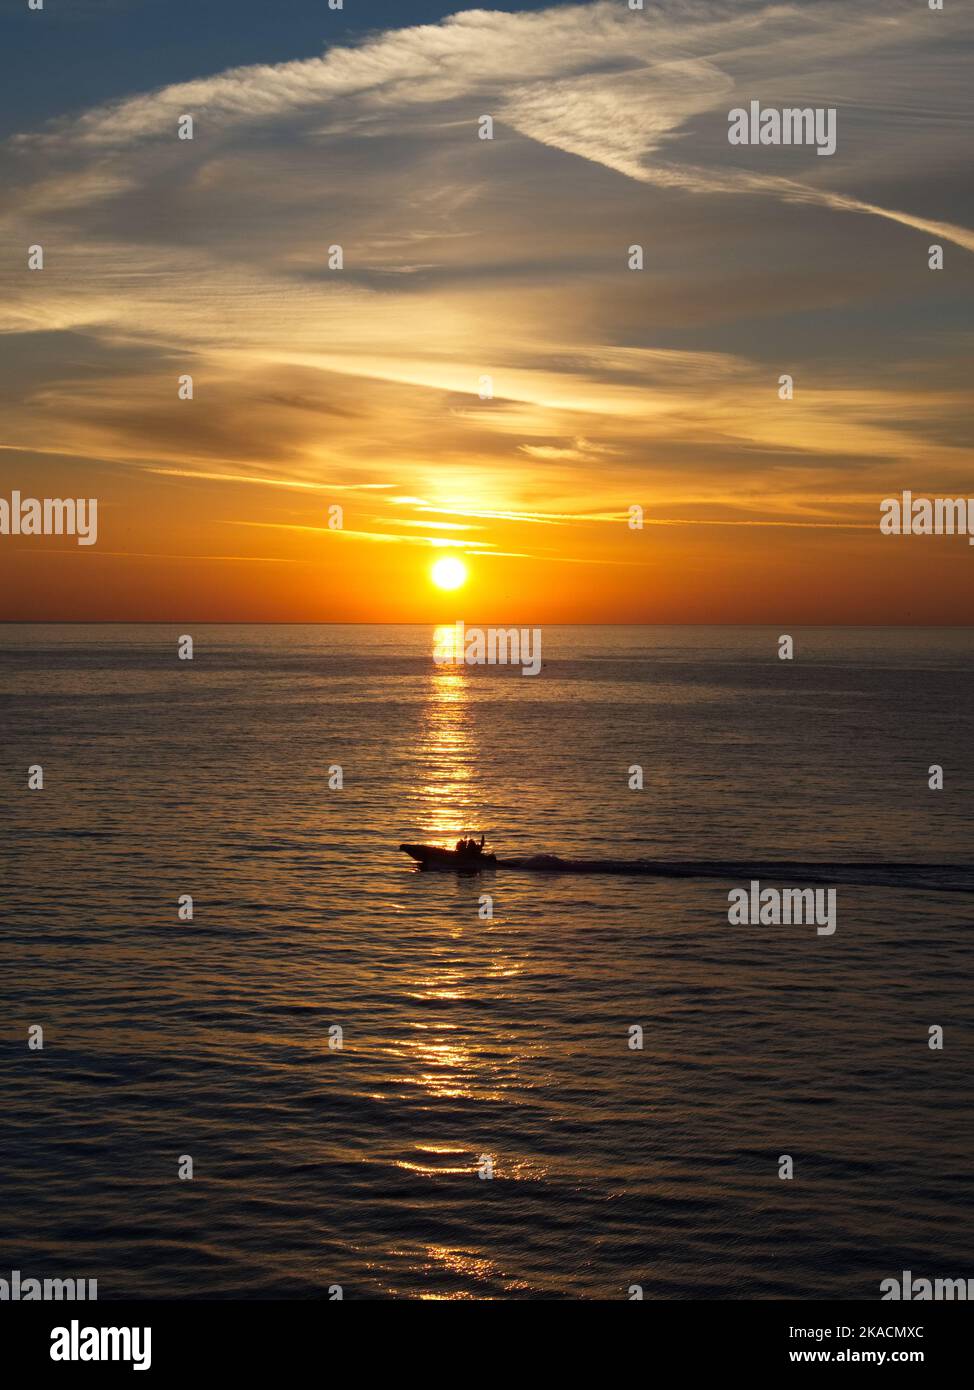 Portrait image of an orange sunrise at sea approaching Monaco with silhouette of speed boat in reflection of the sun across the water Stock Photo